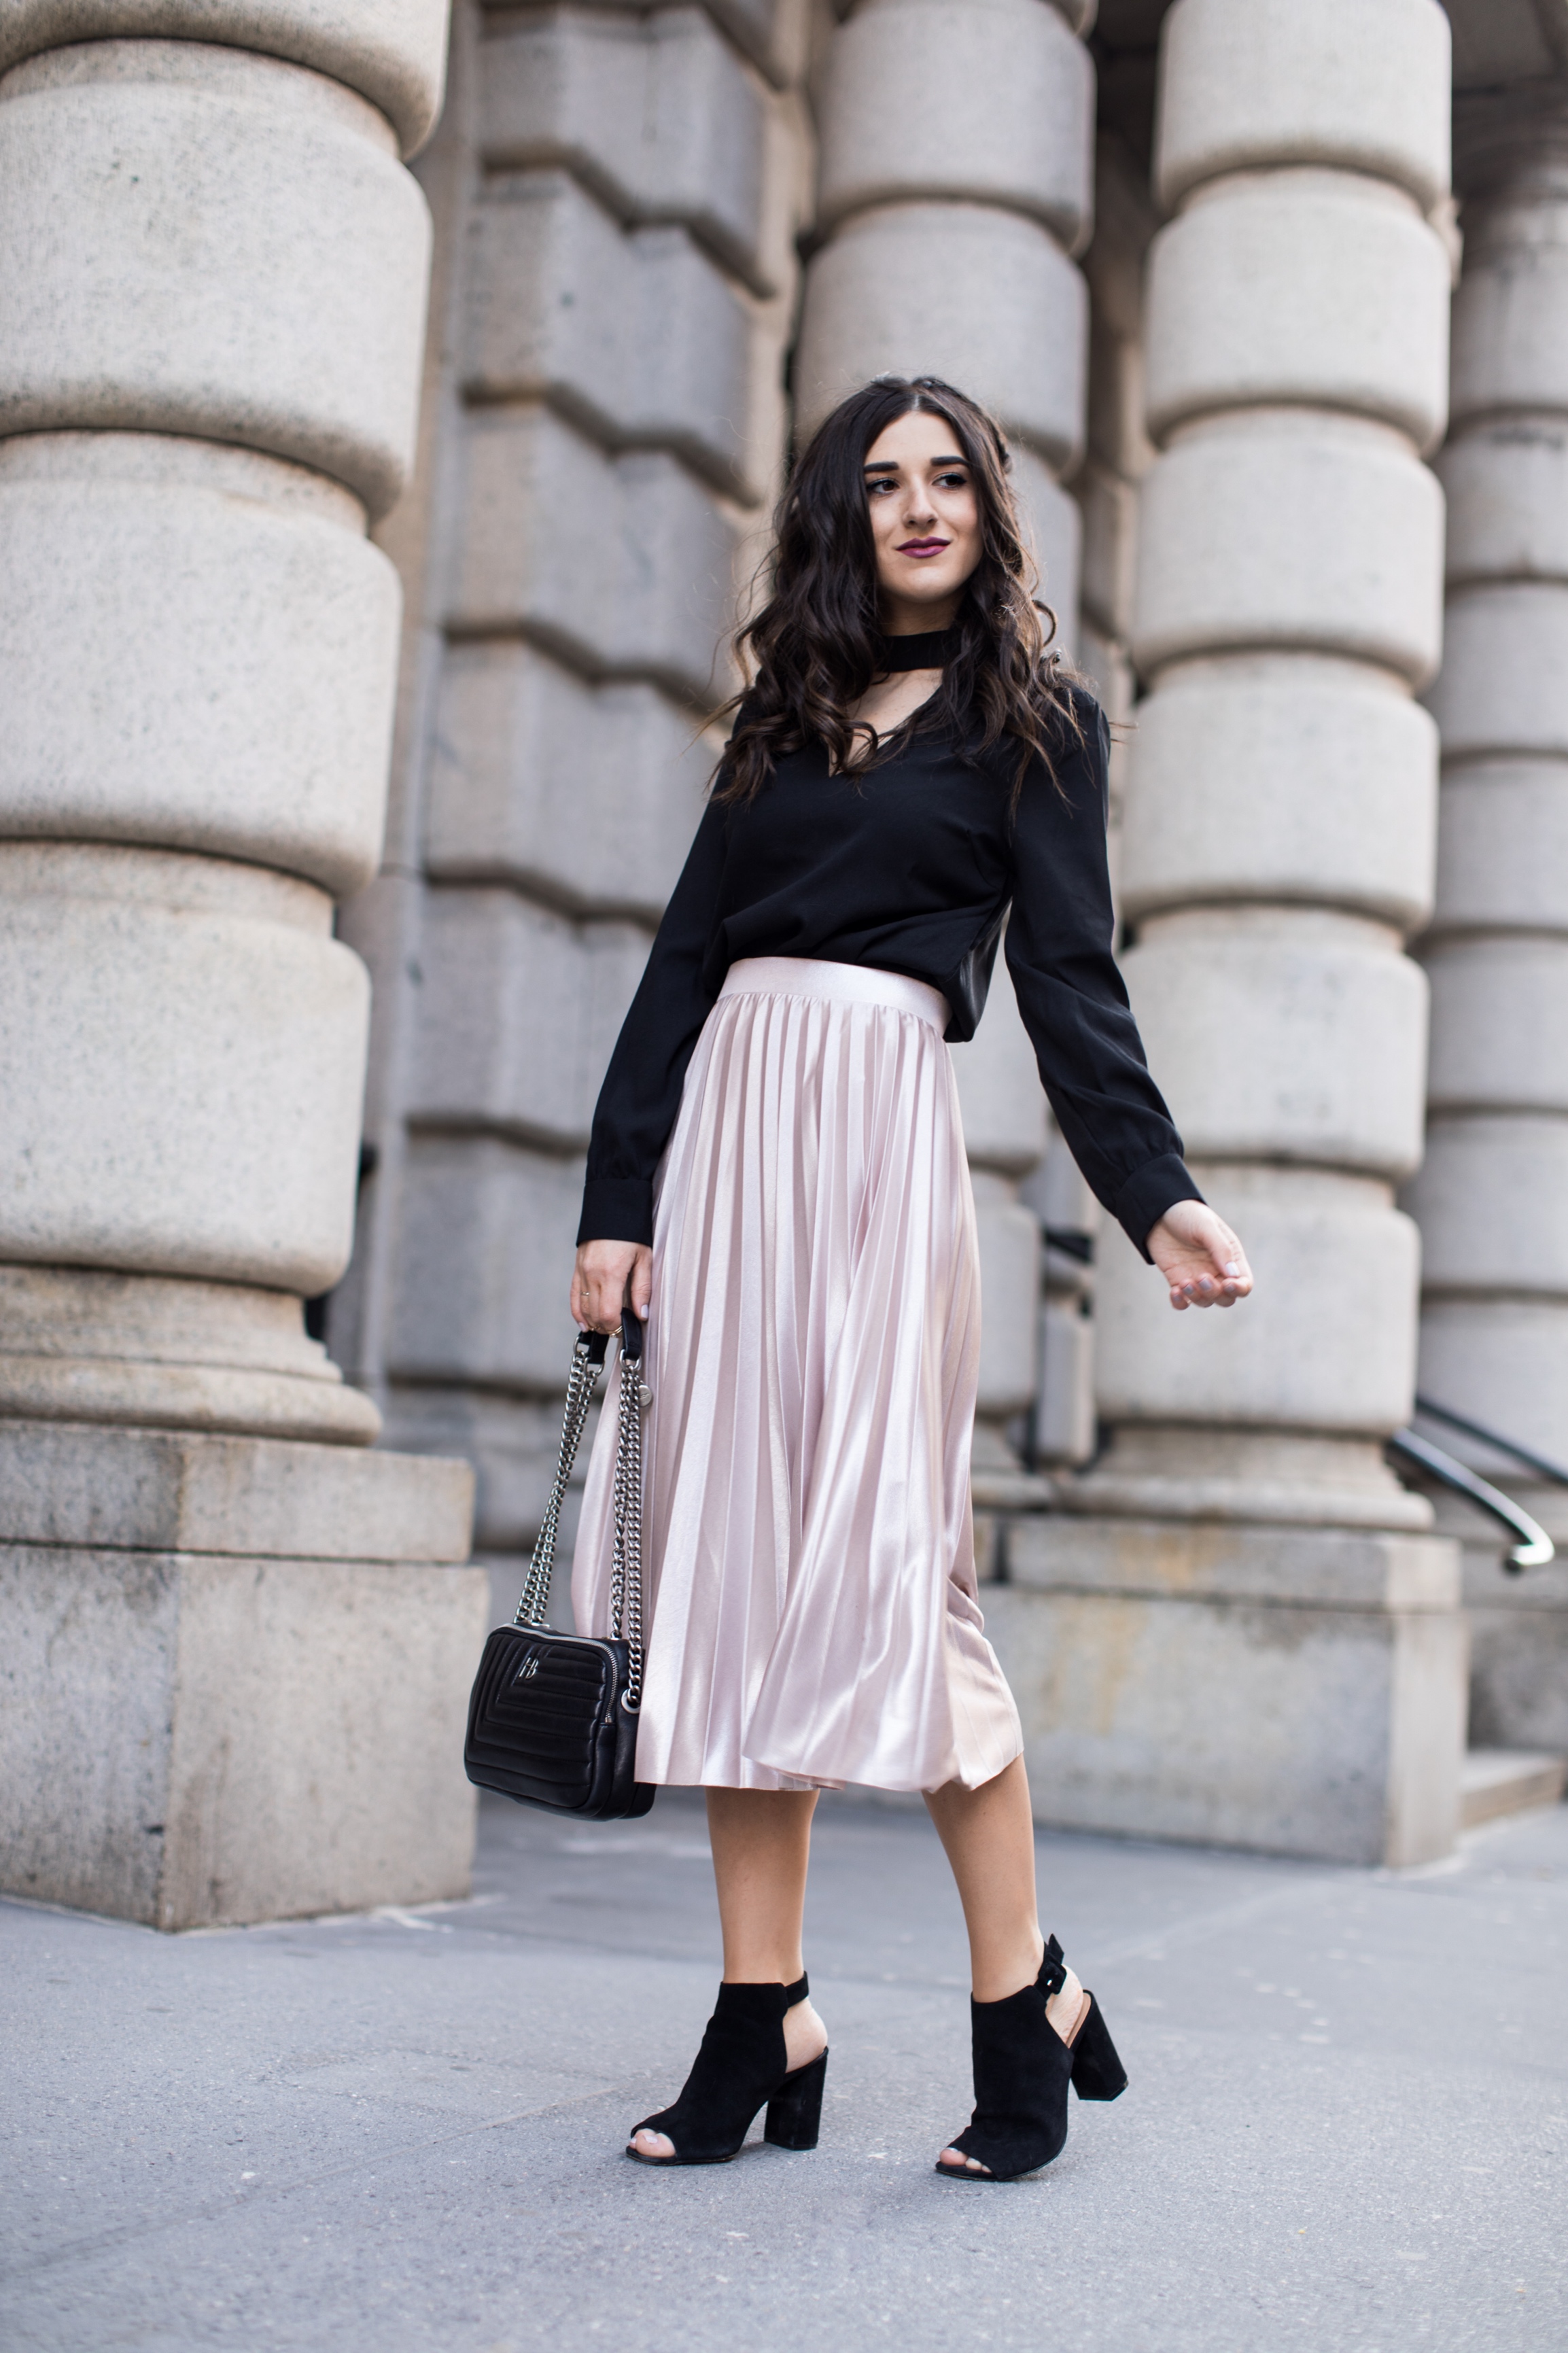 Metallic Midi Skirt Black Cutout Top How I Pack In A Carry On Esther Santer Fashion Blog NYC Street Style Blogger Outfit OOTD Trendy Feminine Girly Spring Hairstyle Waves Travel Tips Honeymoon Photshoot Pose  Wearing Shop Peep Toe Booties Henri Bendel.jpg